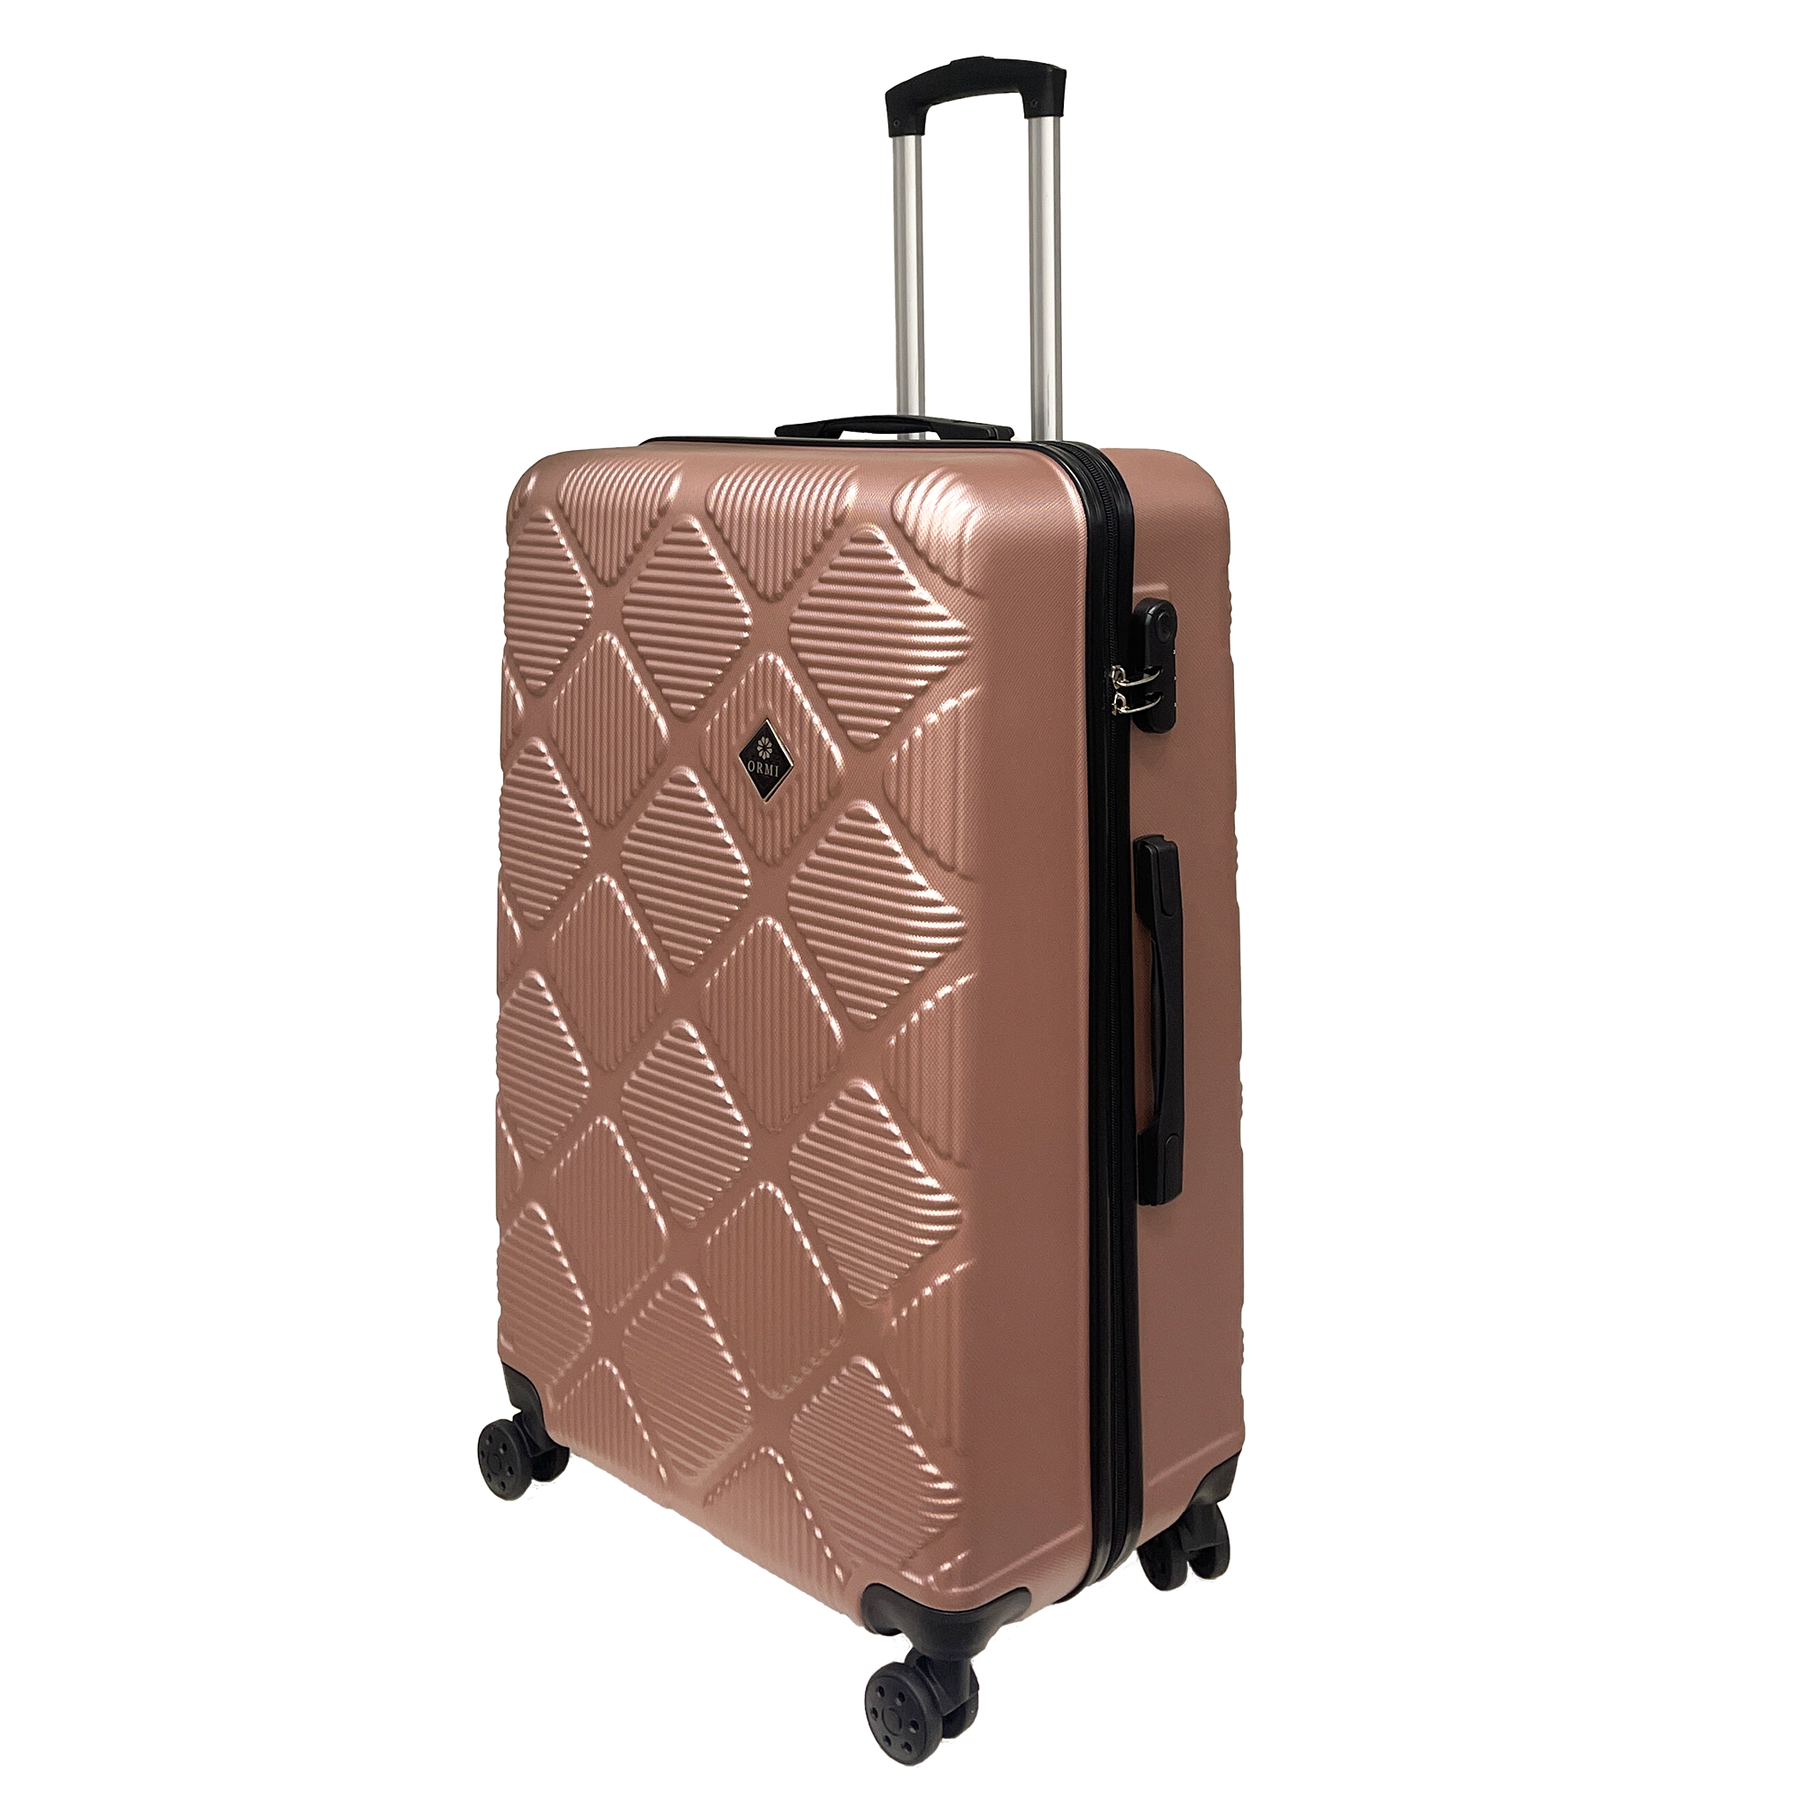 Ormi DuoLine Large Hardshell Trolley Suitcase 75x50x30 cm Ultra Lightweight in ABS with 4 360° Swivel Wheels